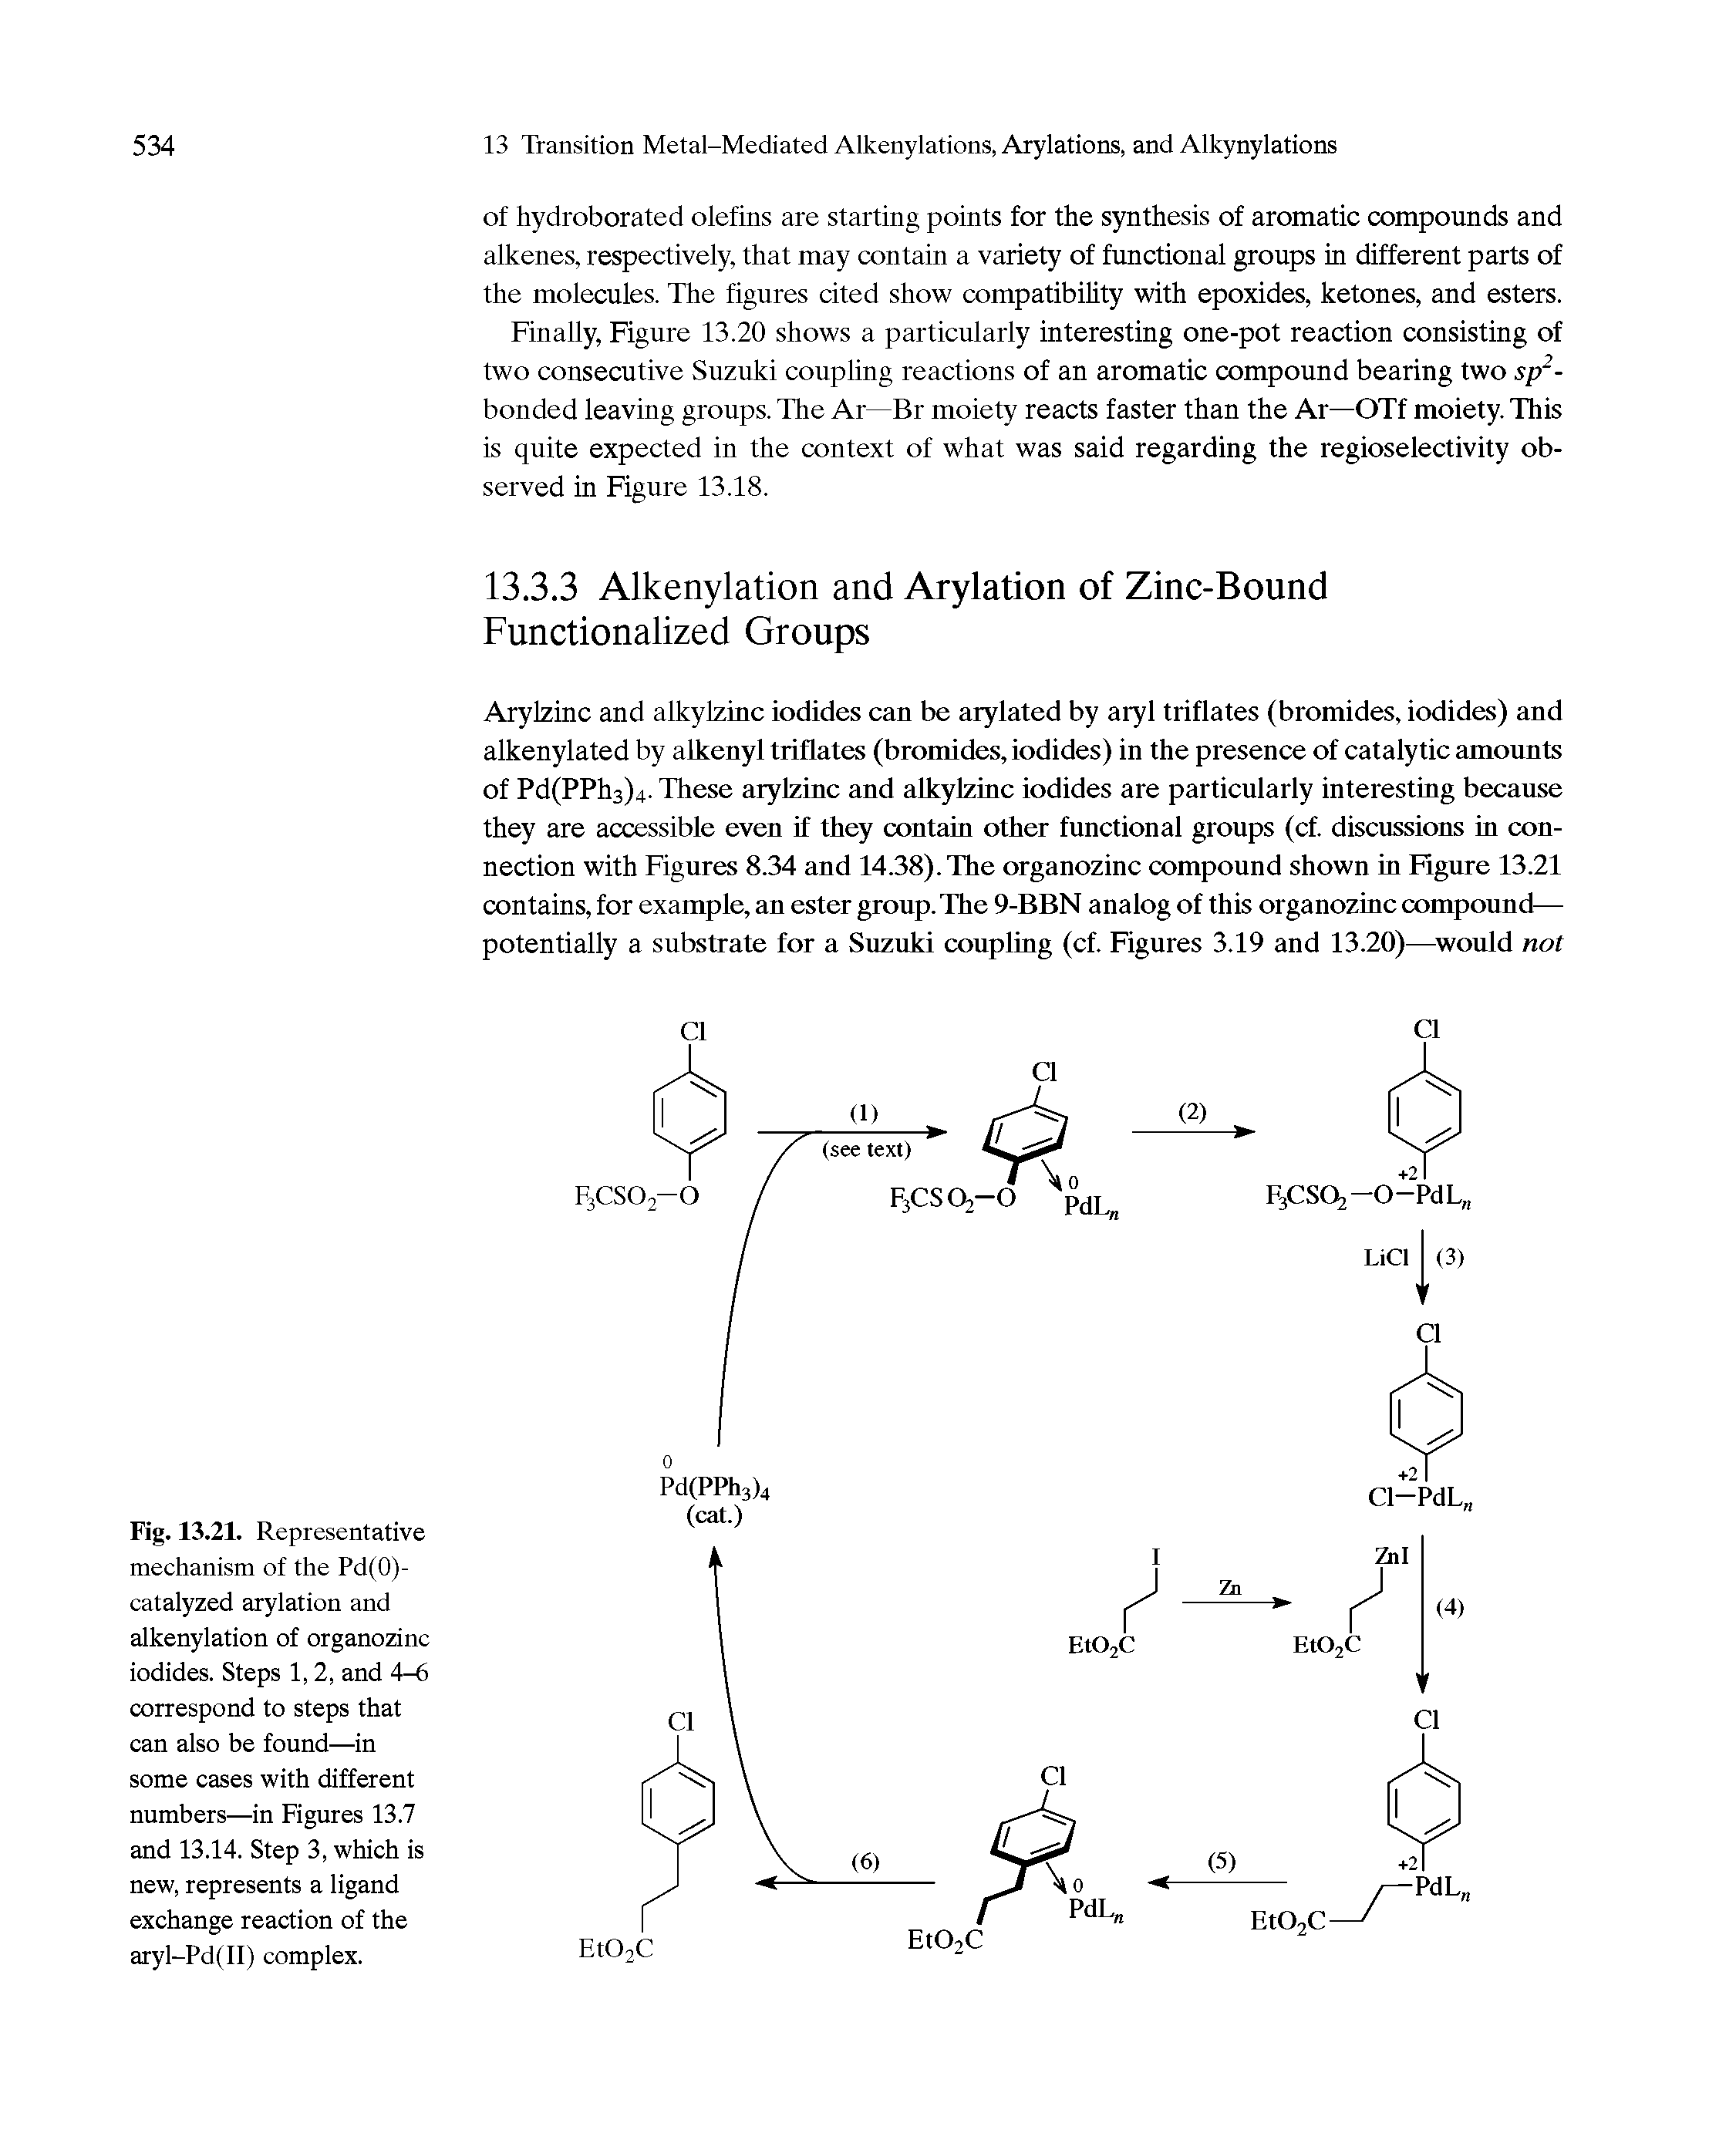 Fig. 13.21. Representative mechanism of the Pd(0)-catalyzed arylation and alkenylation of organozinc iodides. Steps 1,2, and 4-6 correspond to steps that can also be found—in some cases with different numbers—in Figures 13.7 and 13.14. Step 3, which is new, represents a ligand exchange reaction of the aryl-Pd(II) complex.